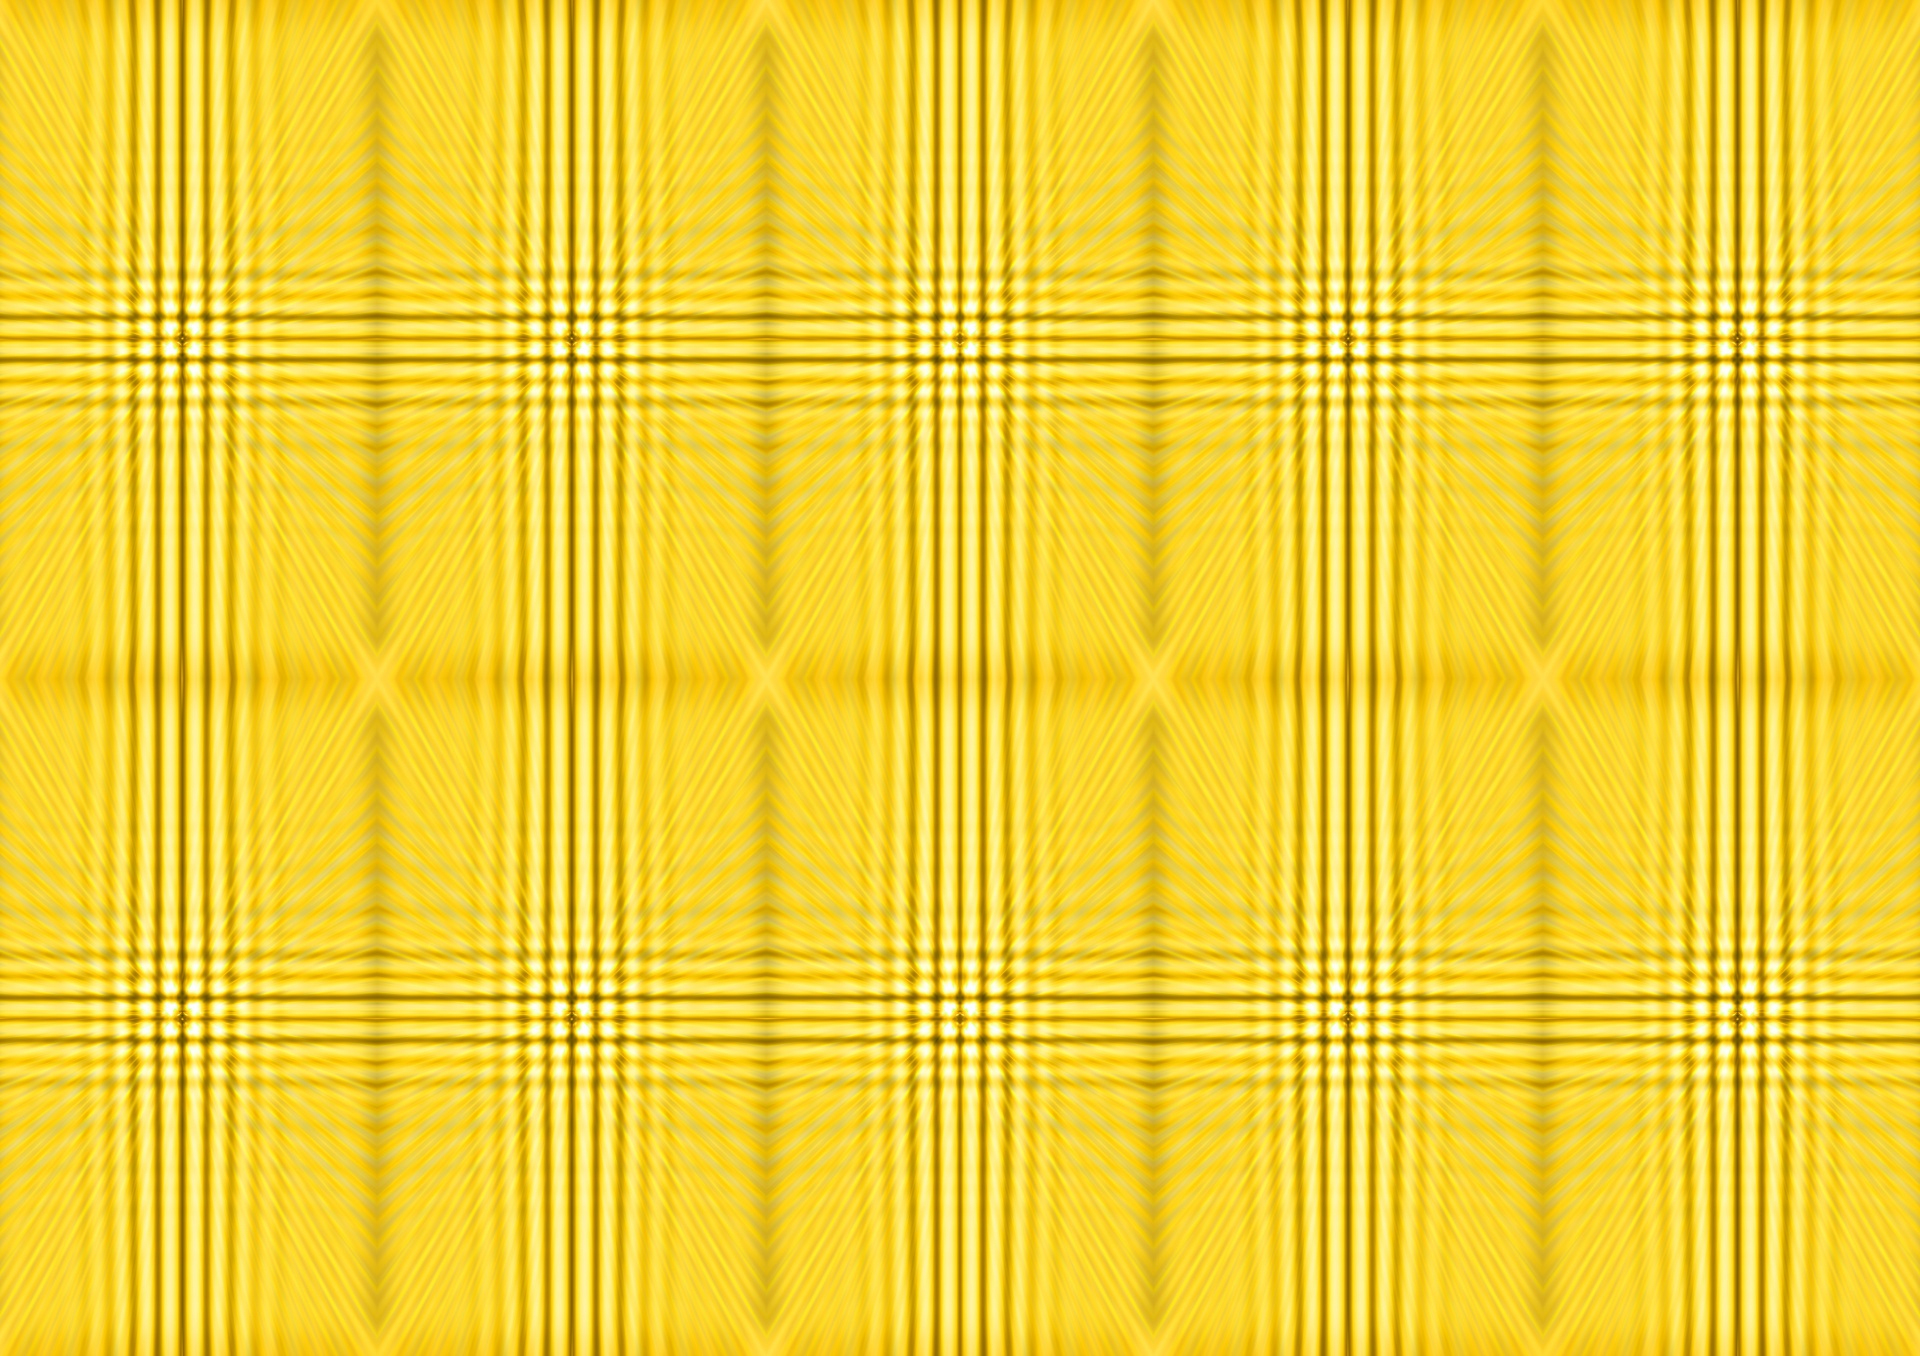 Light Zooming Out Repeat Pattern